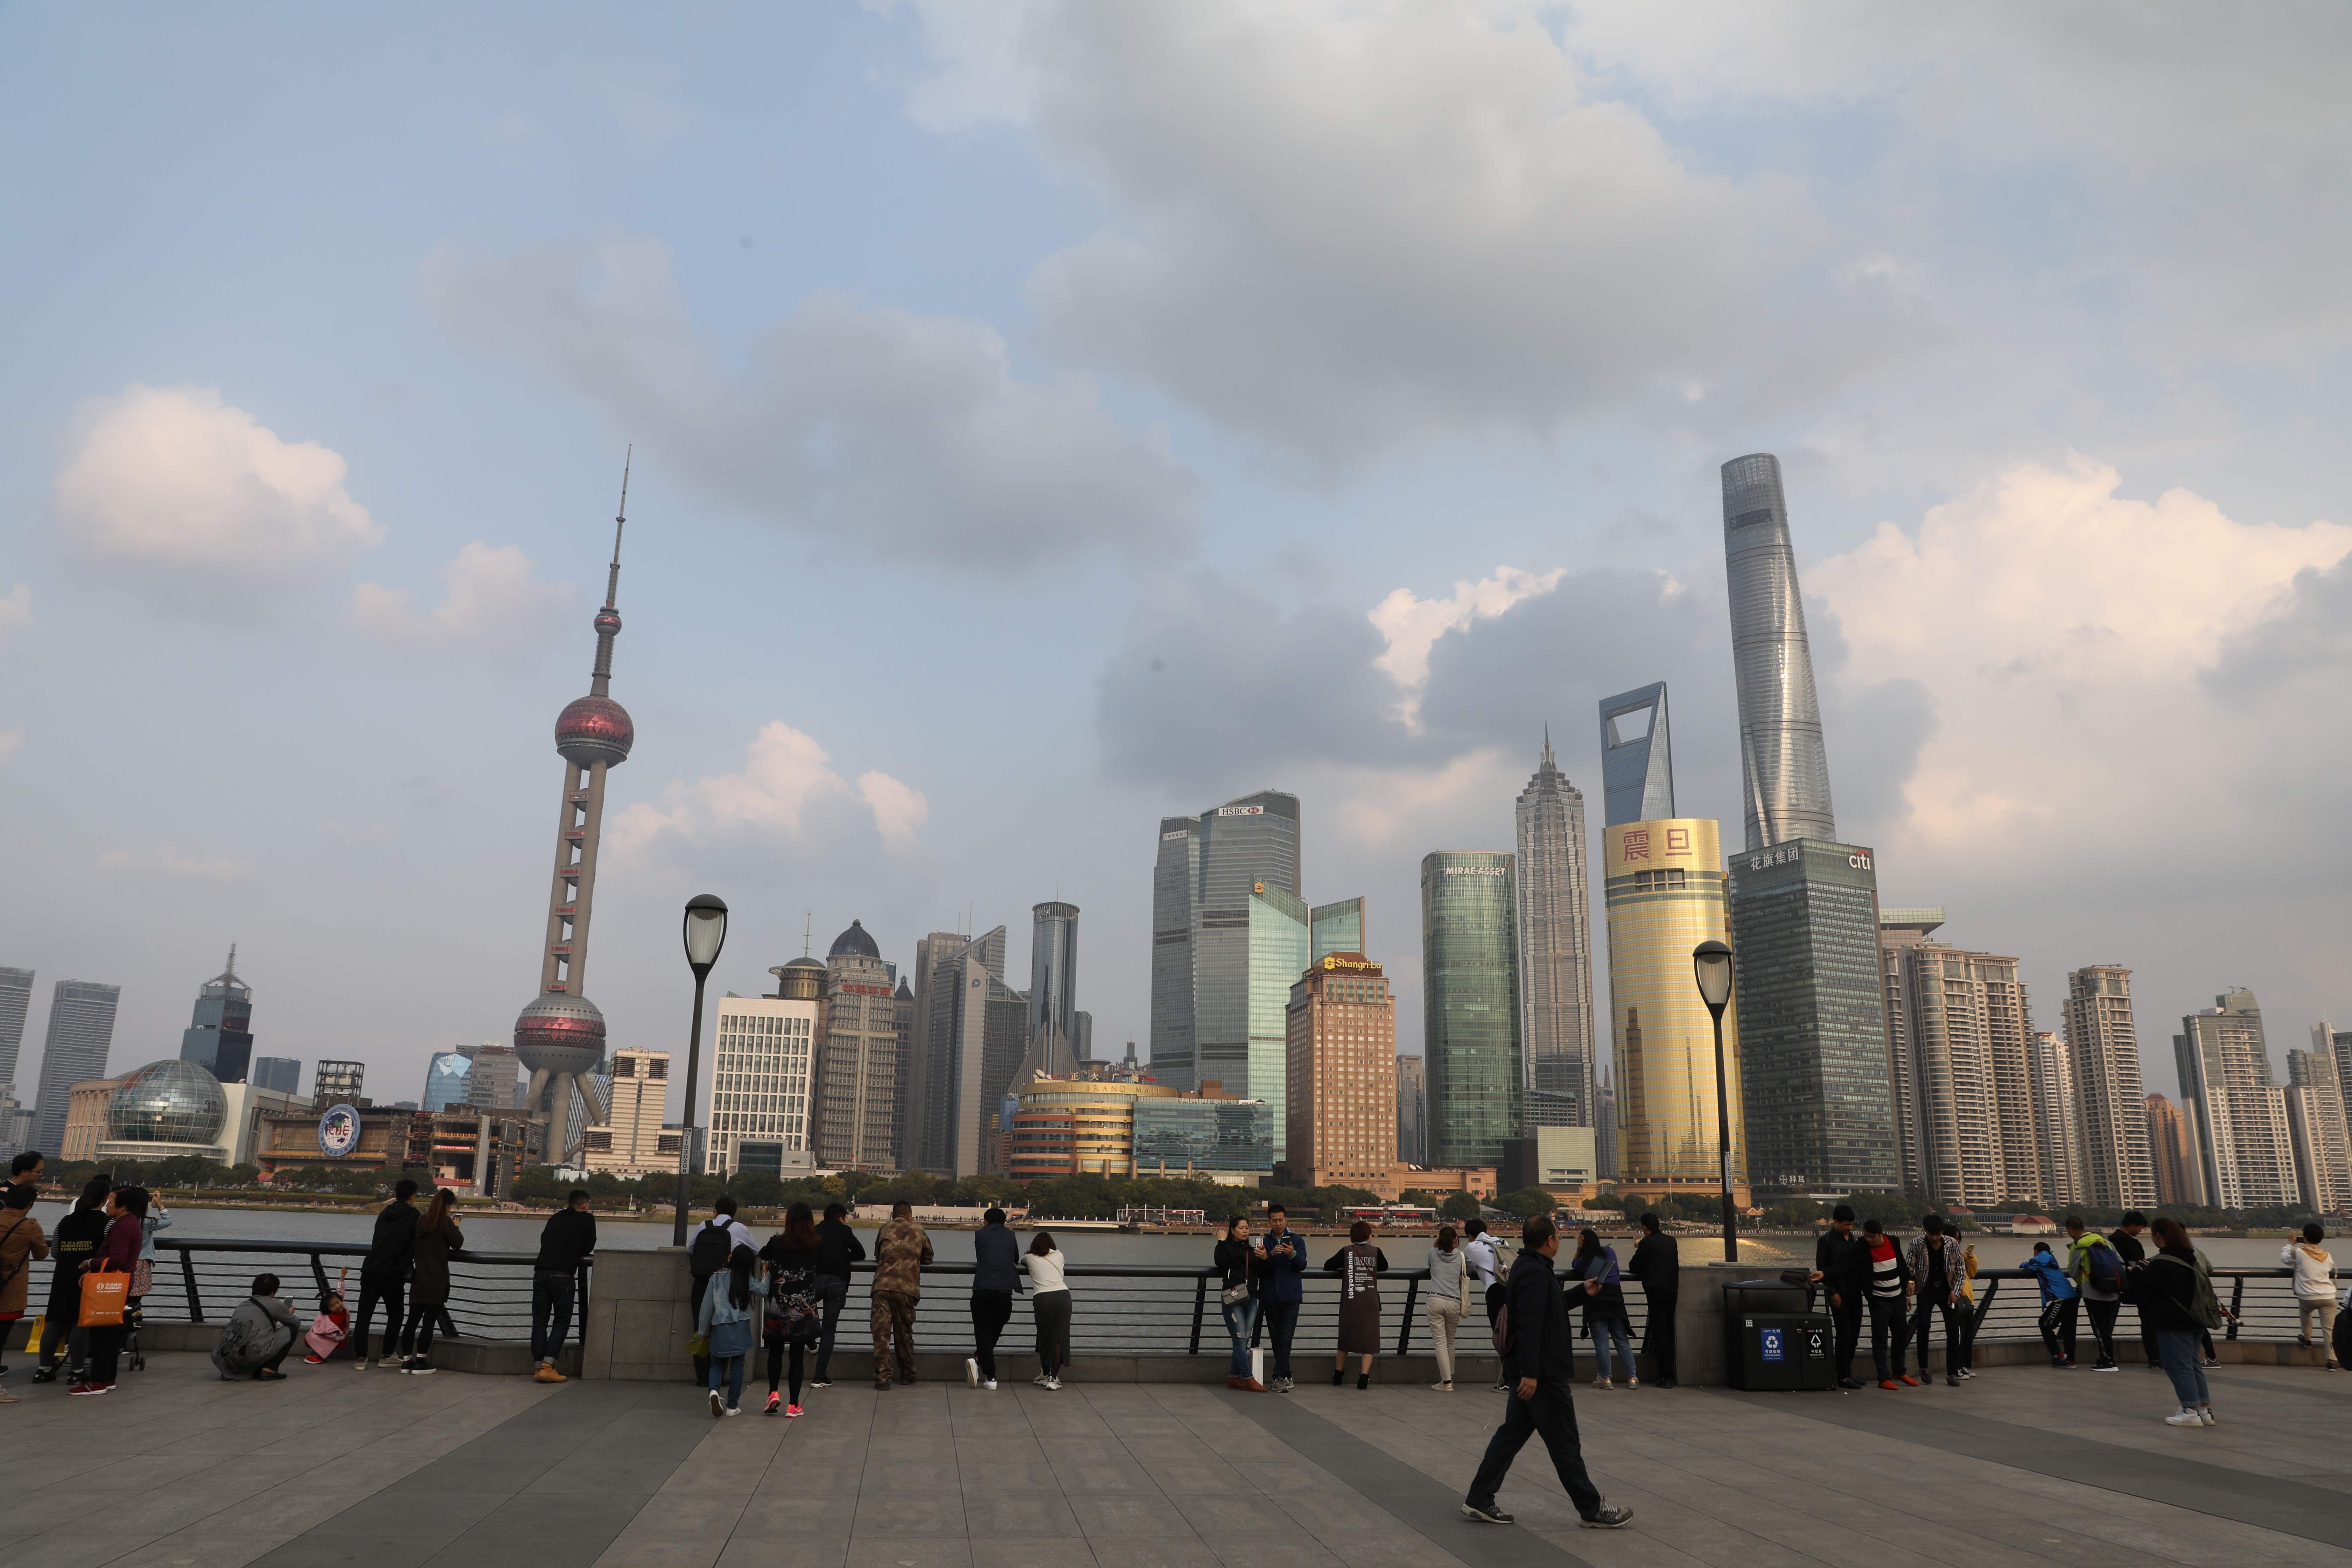 The Shanghai skyline. China’s economy has become so advanced it may no longer be the best place for young people seeking to get a leg up on the career ladder. Photo: AFP